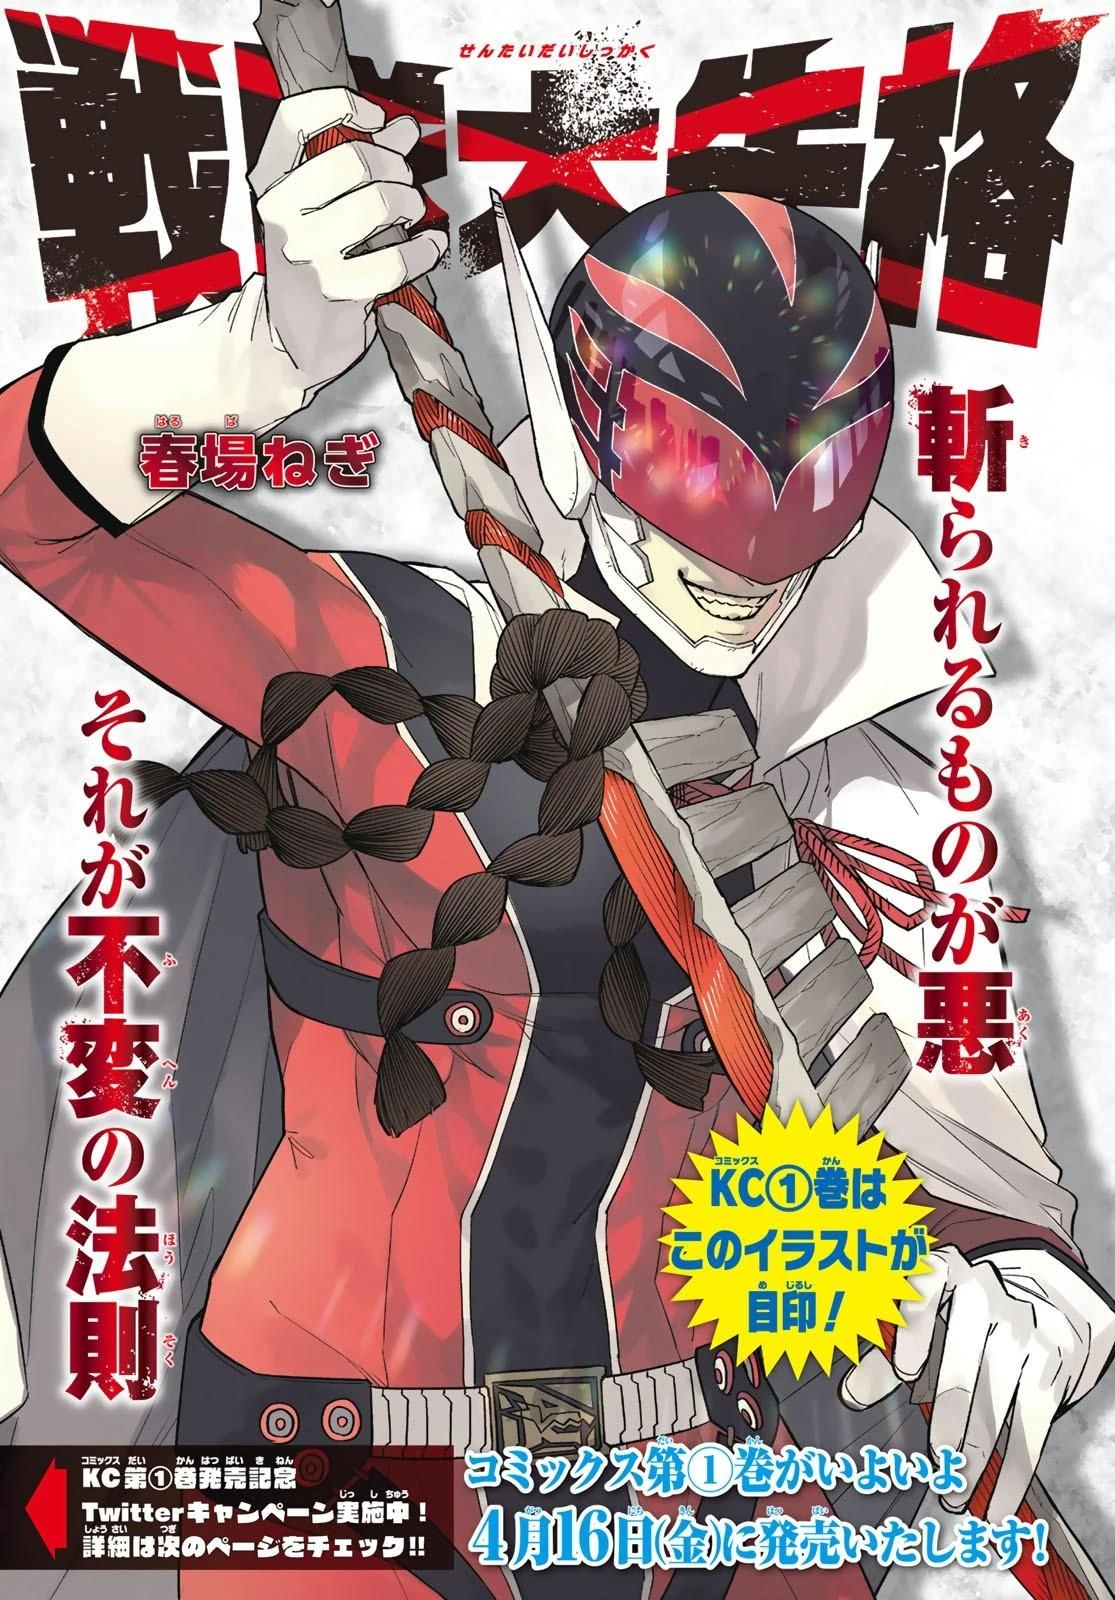 Red Dragon Keeper draws his divine tool on the cover of Ranger Reject Ch.  10 "The power of one's emotions" (2021), Kodansha via digital edition